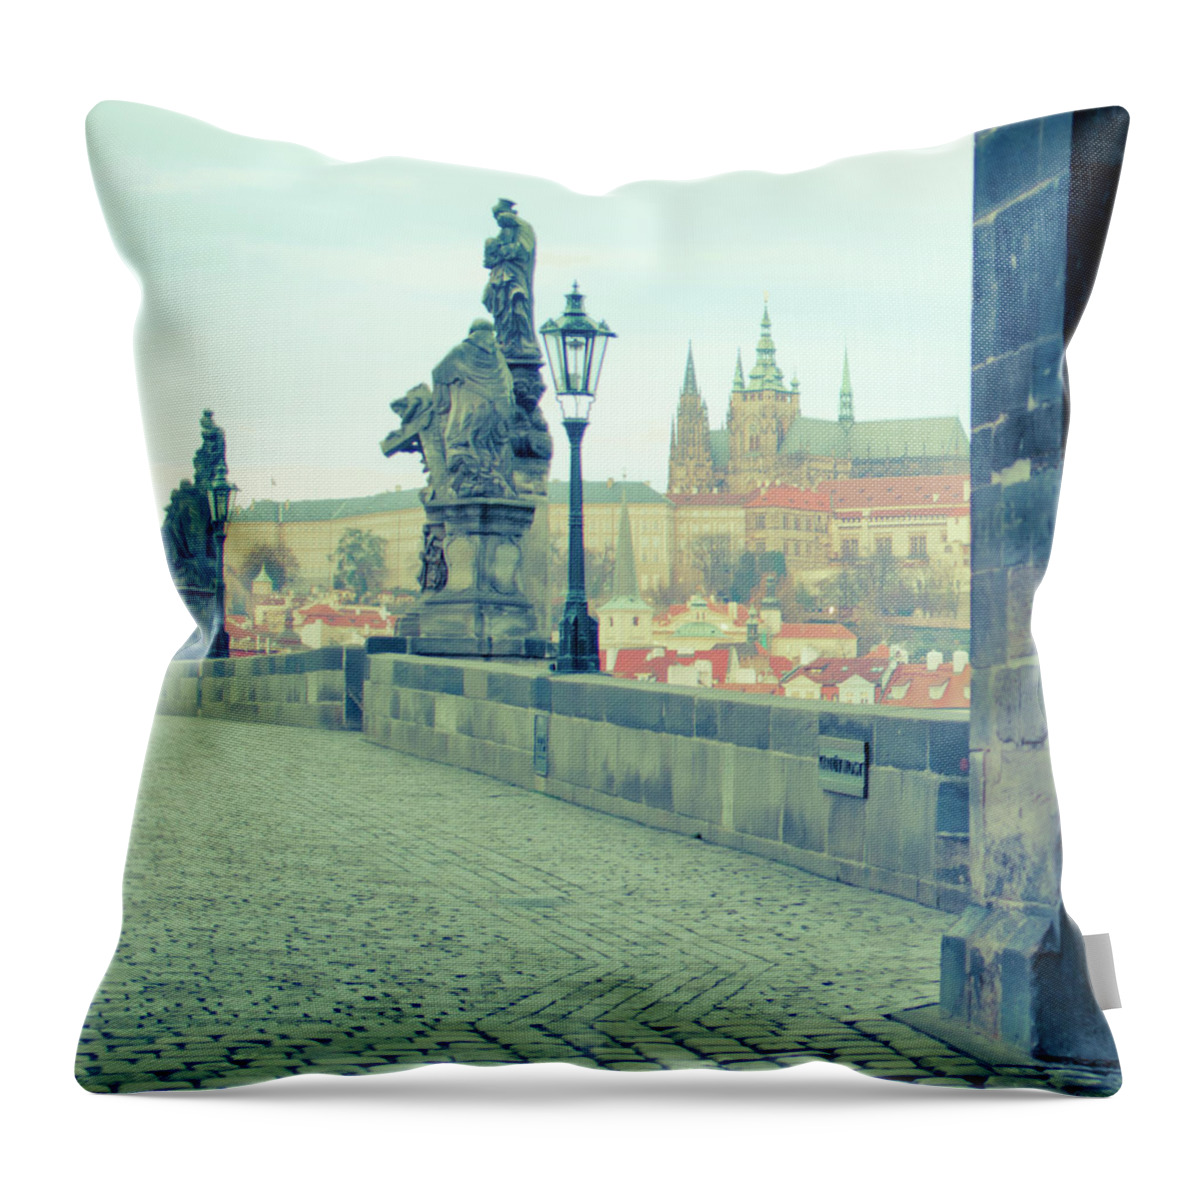 Tranquility Throw Pillow featuring the photograph Prague Castle From Charles Bridge by G.g.bruno